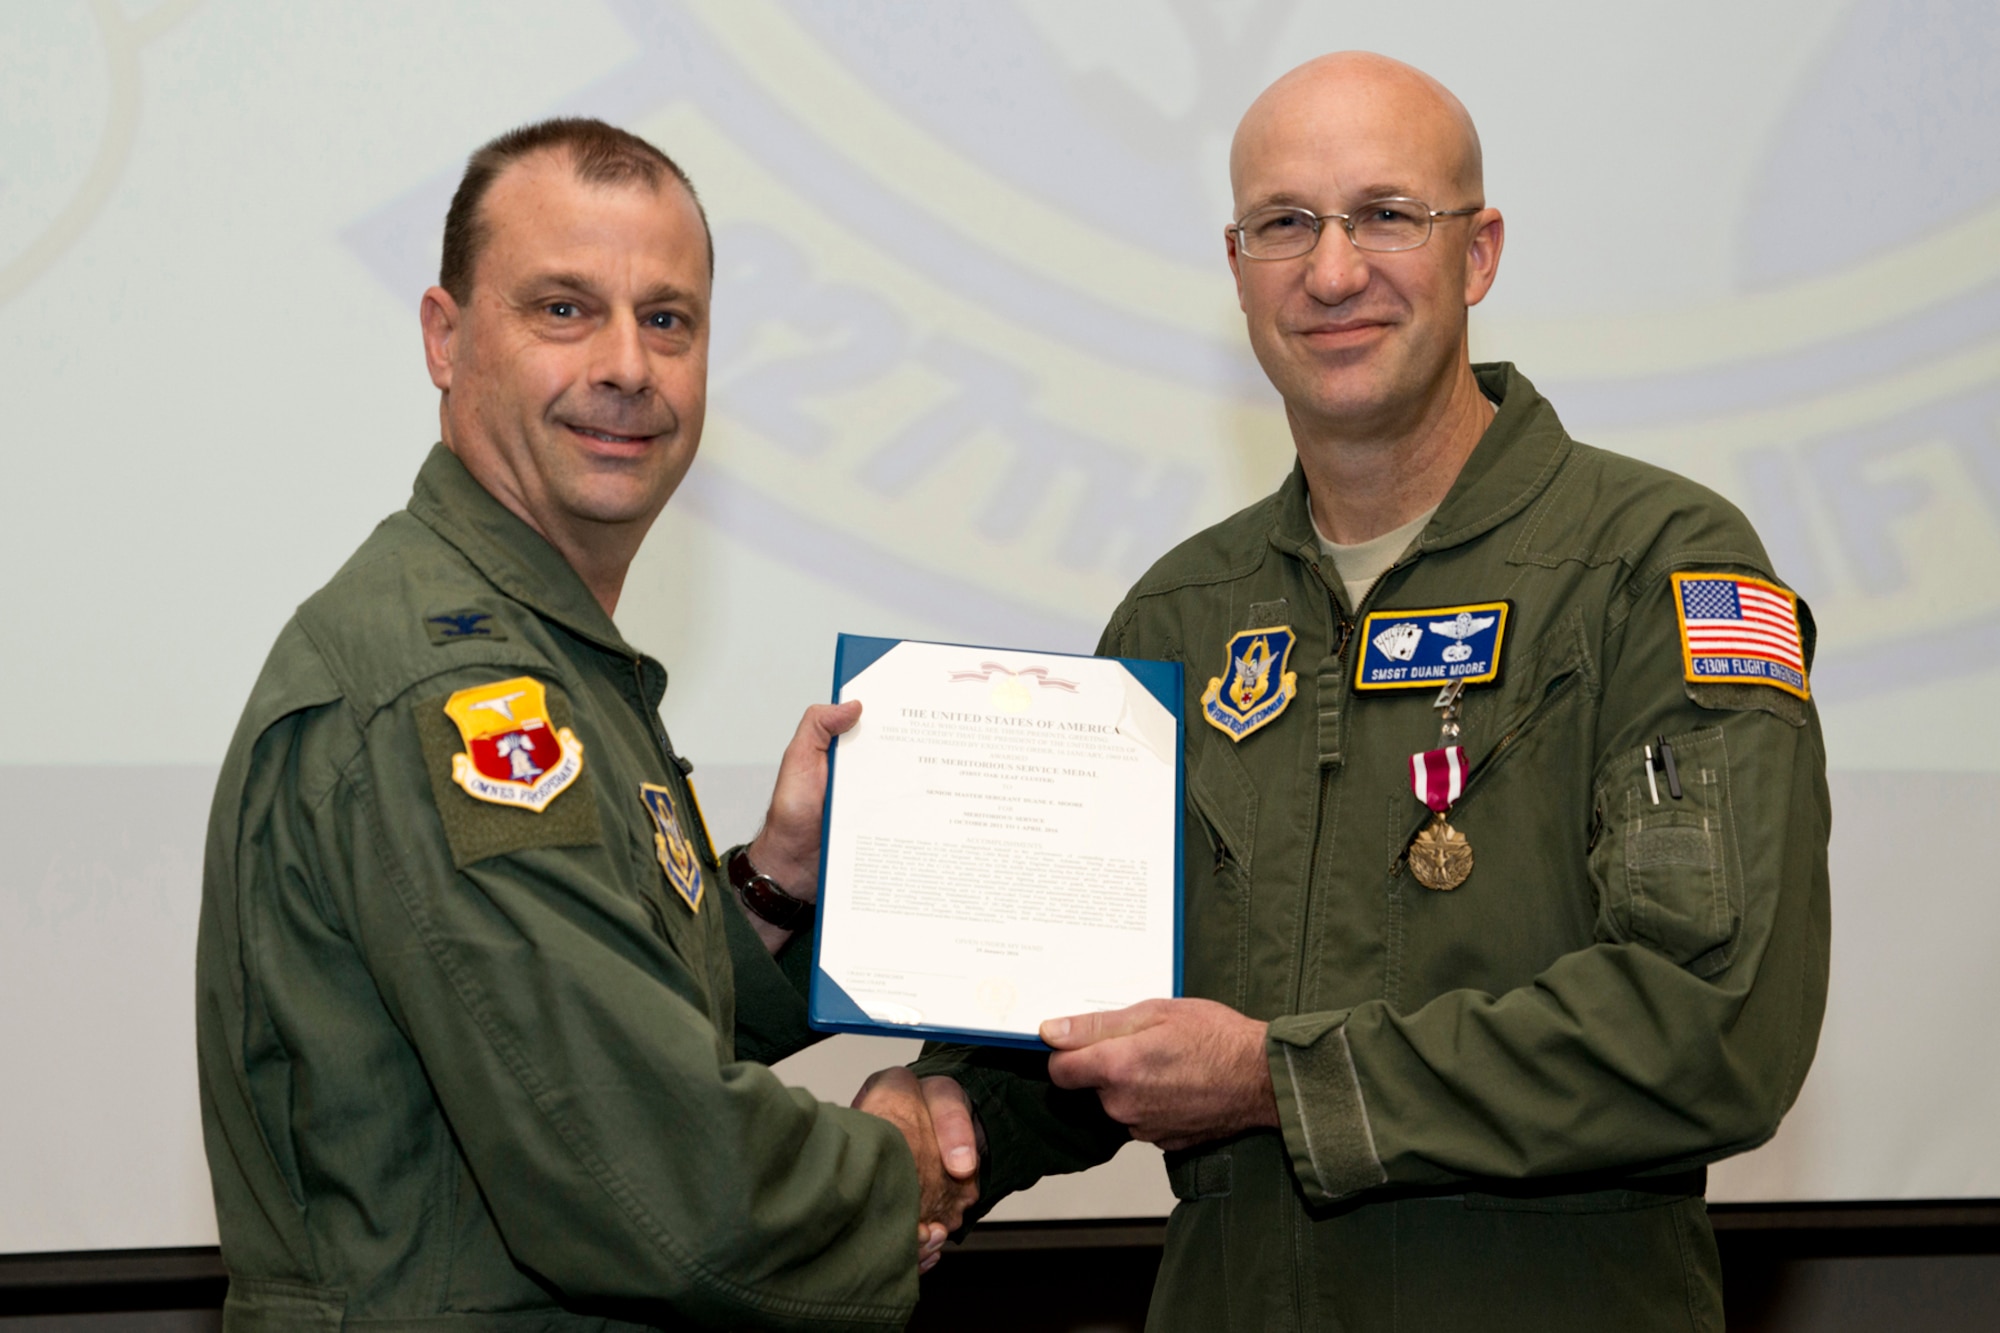 U.S. Air Force Reserve Col. Craig Drescher, commander, 913th Airlift Group, and Senior Master Sgt. Duane Moore, flight engineer, 327th Airlift Squadron, pose for a photo at Little Rock Air Force Base, Ark., Mar. 31, 2016. Moore was awarded the Air Force Meritorious Service Medal for outstanding service to the 913 AG from 1 October 2011 to 1 April 2016. He retires on Apr. 1, 2016, after more than 30 years, seven months and eight days of military service. (U.S. Air Force photo by Master Sgt. Jeff Walston/Released) 